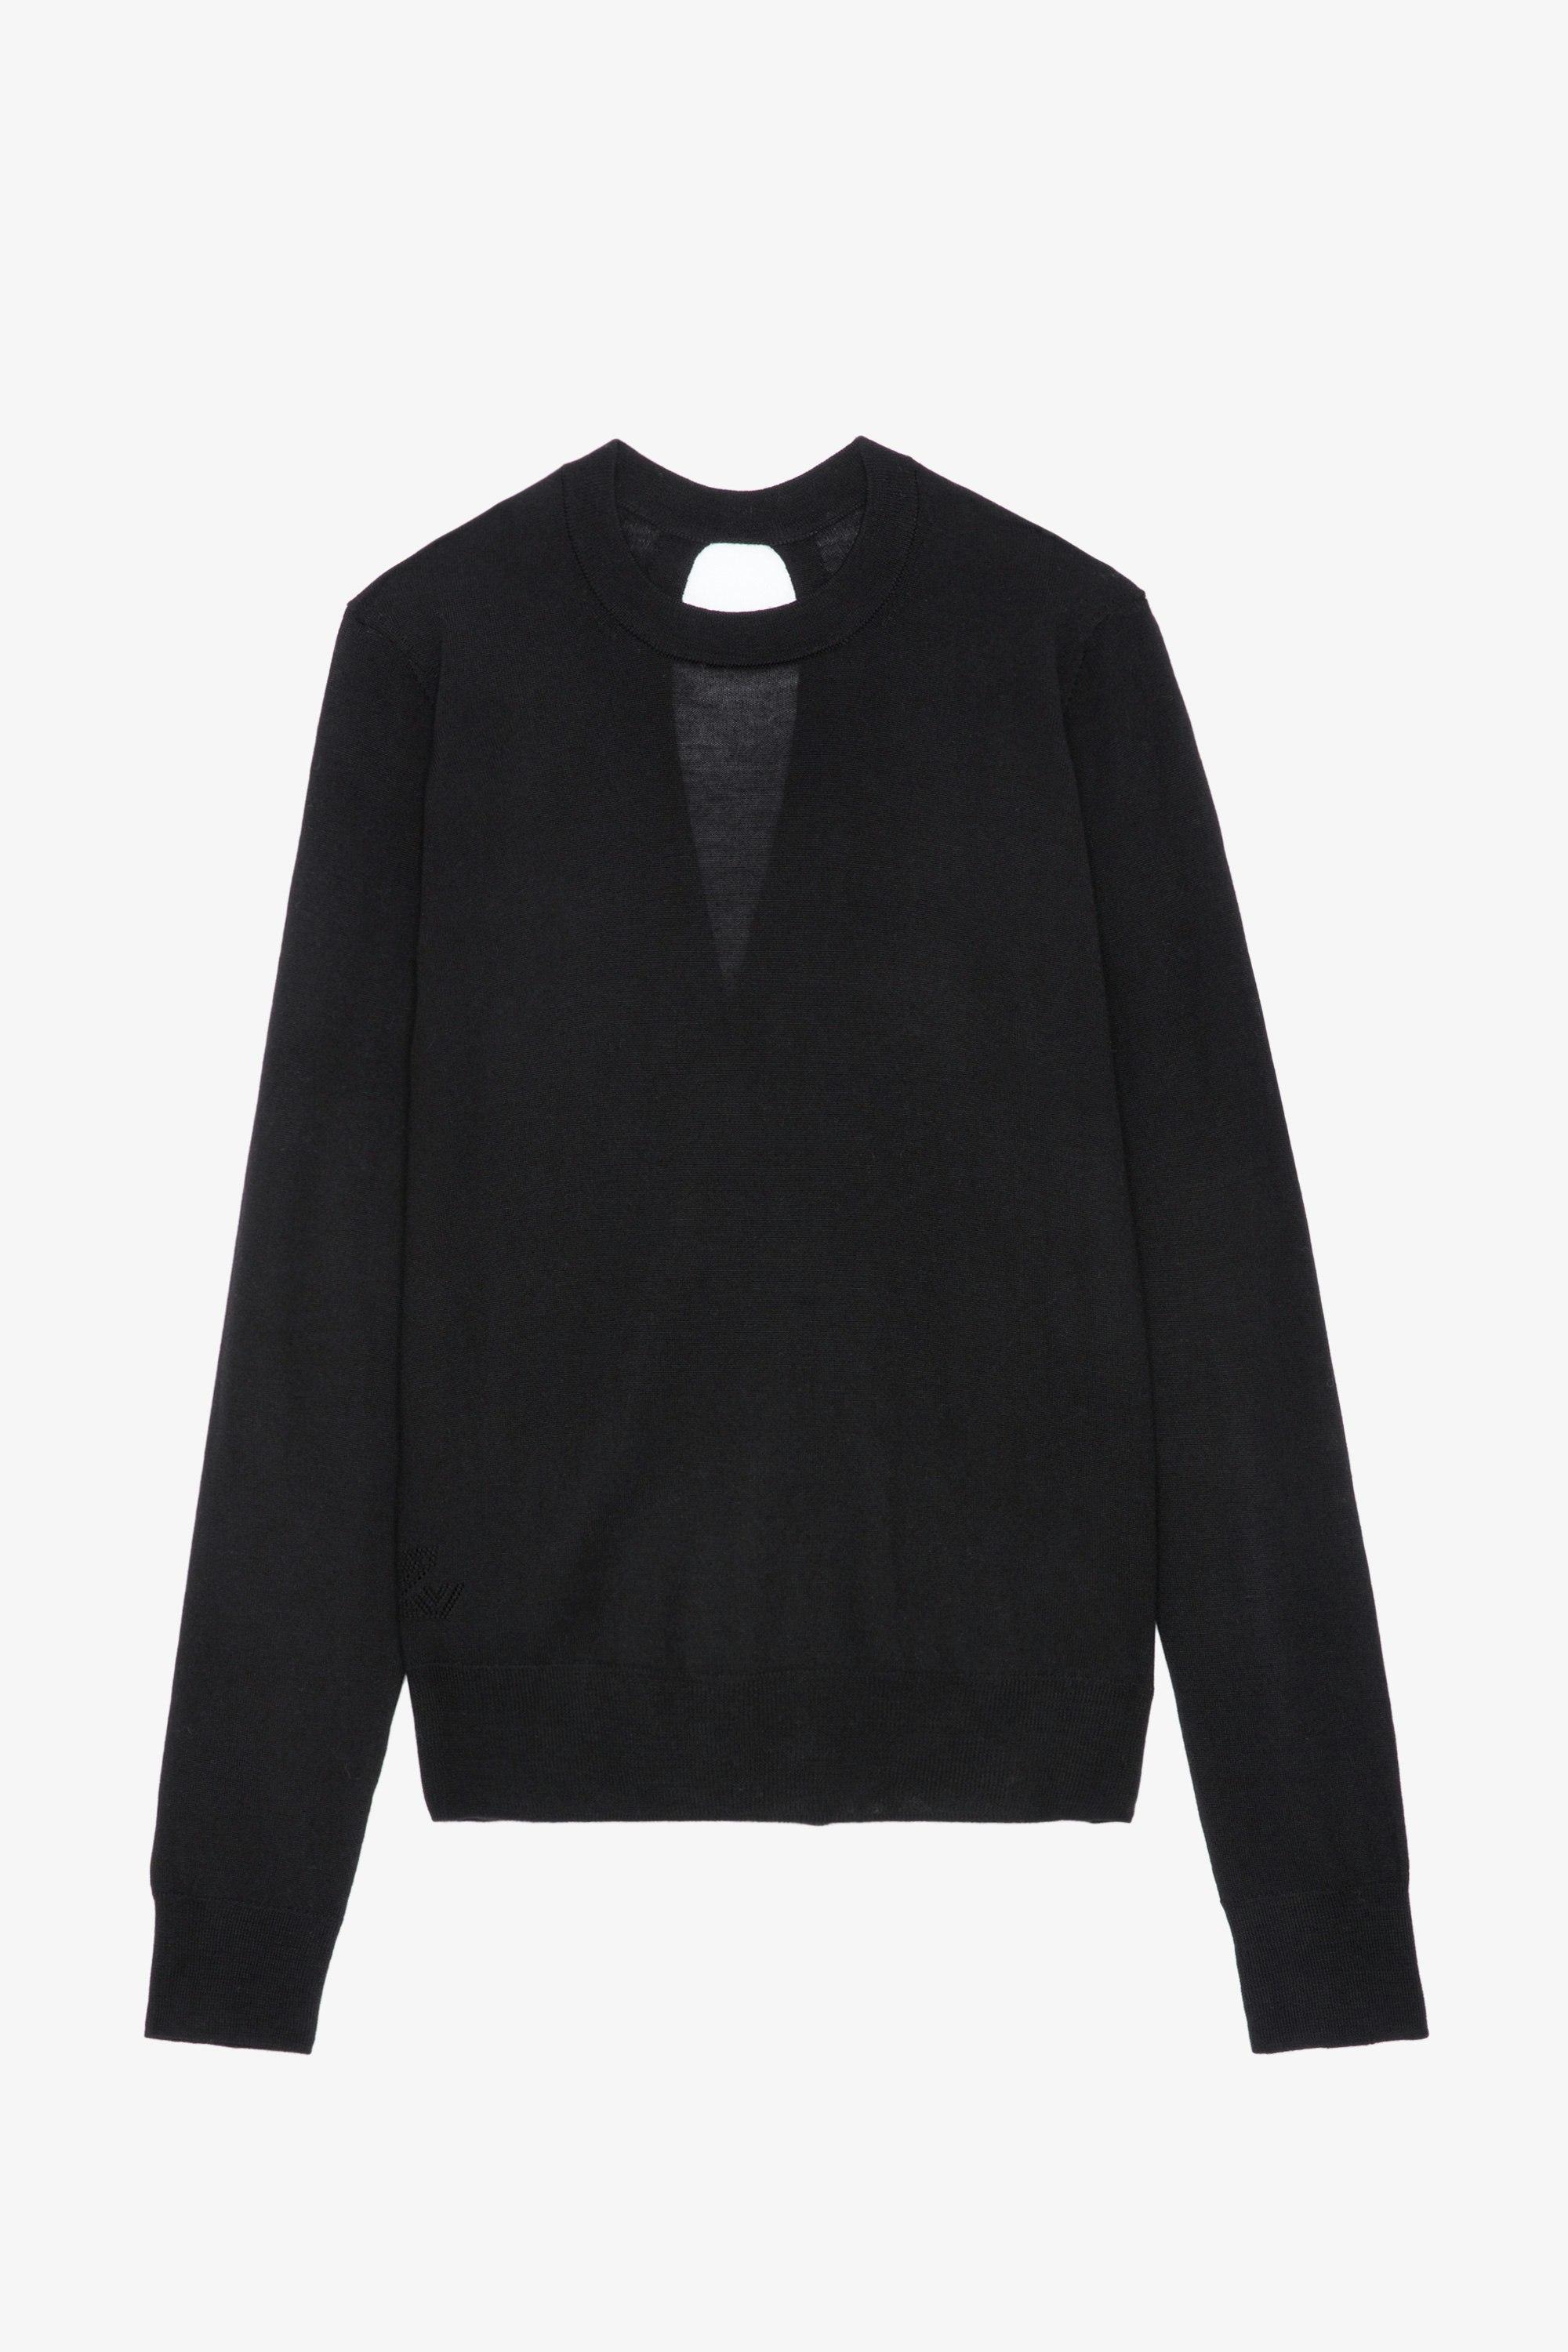 Emma ニット - Black merino wool round-neck jumper with long sleeves and open crossover back.